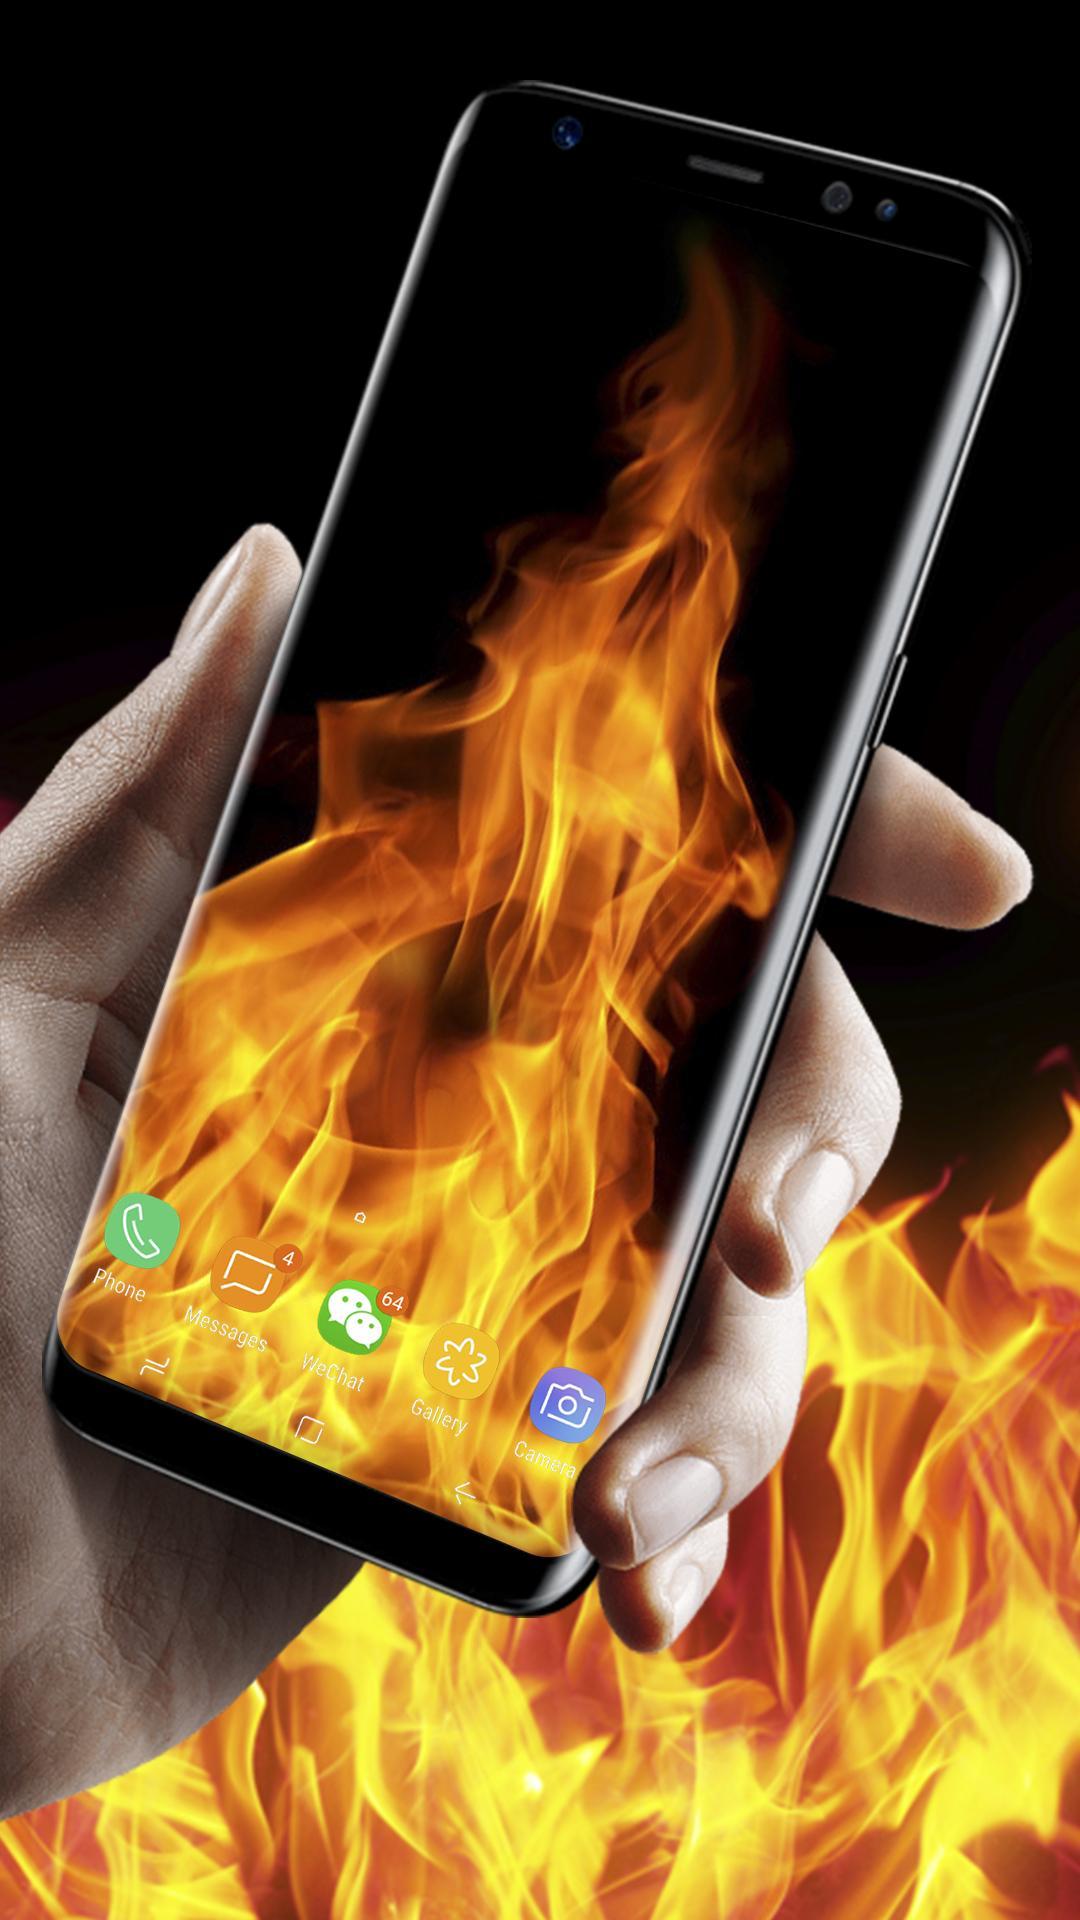 3d Fire Video Live Wallpaper Pro For Android Apk Download